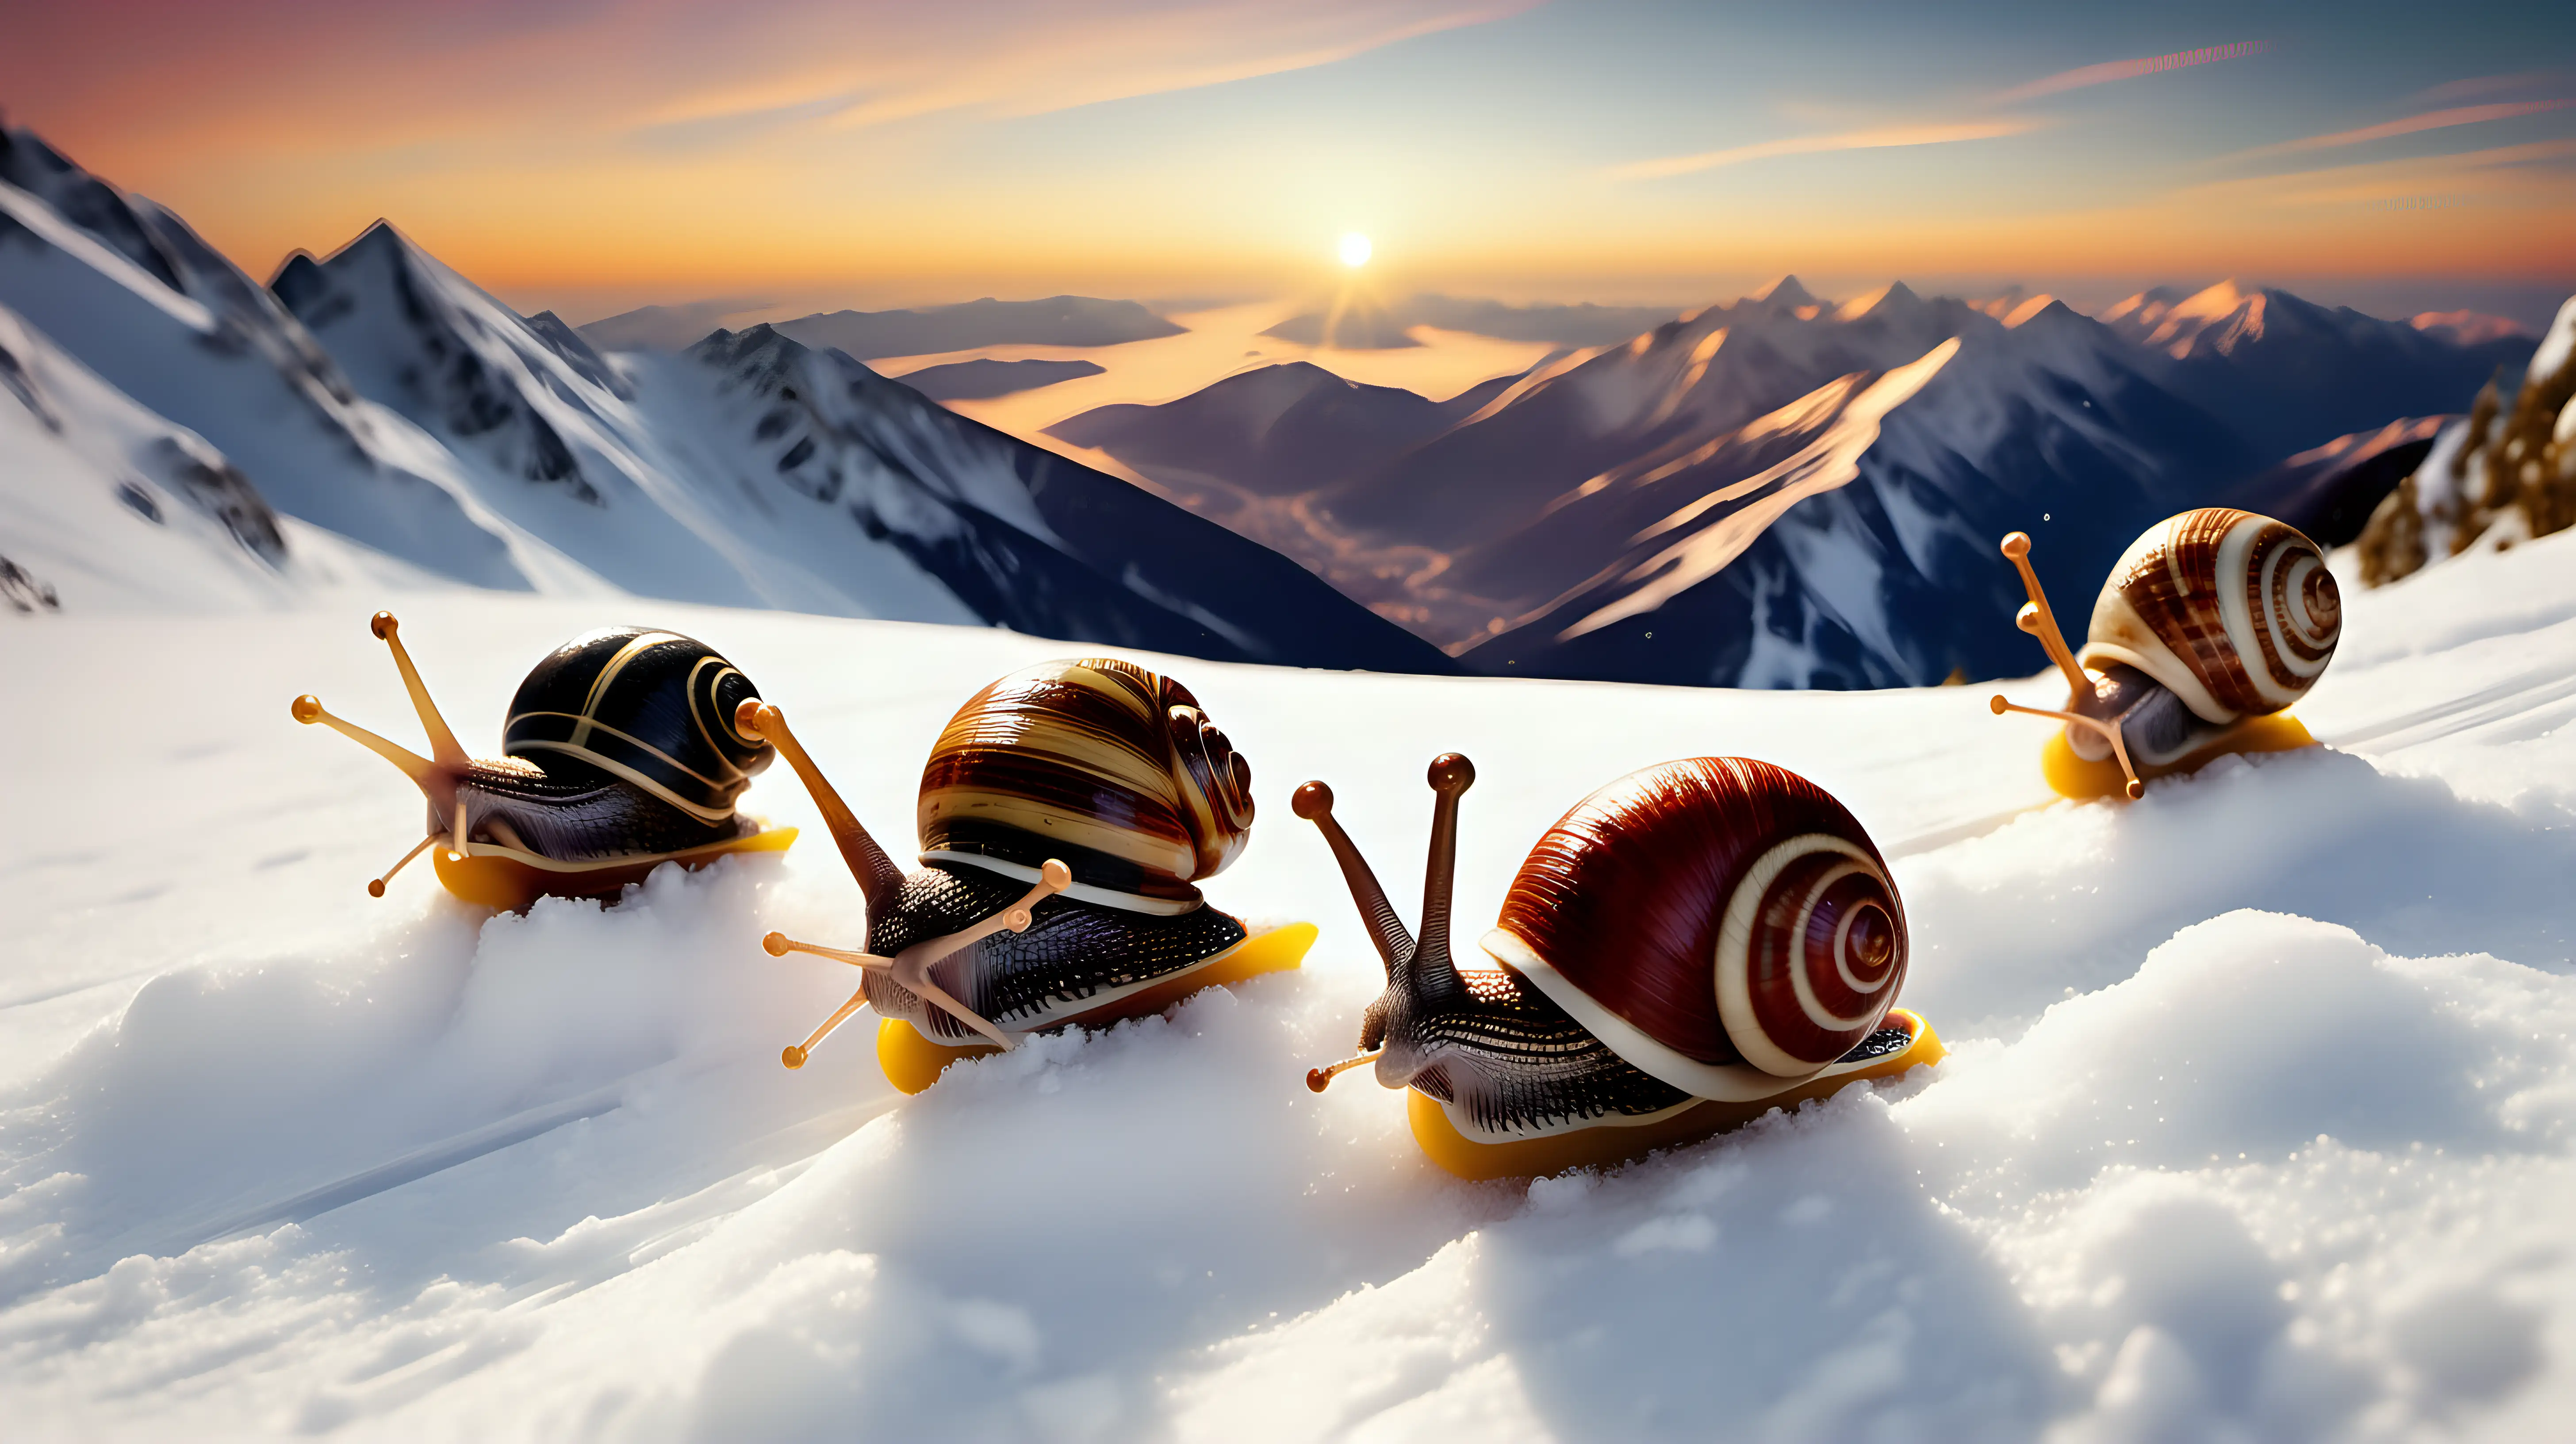 4 French snails downhill skiing at sunset on a snowy mountain